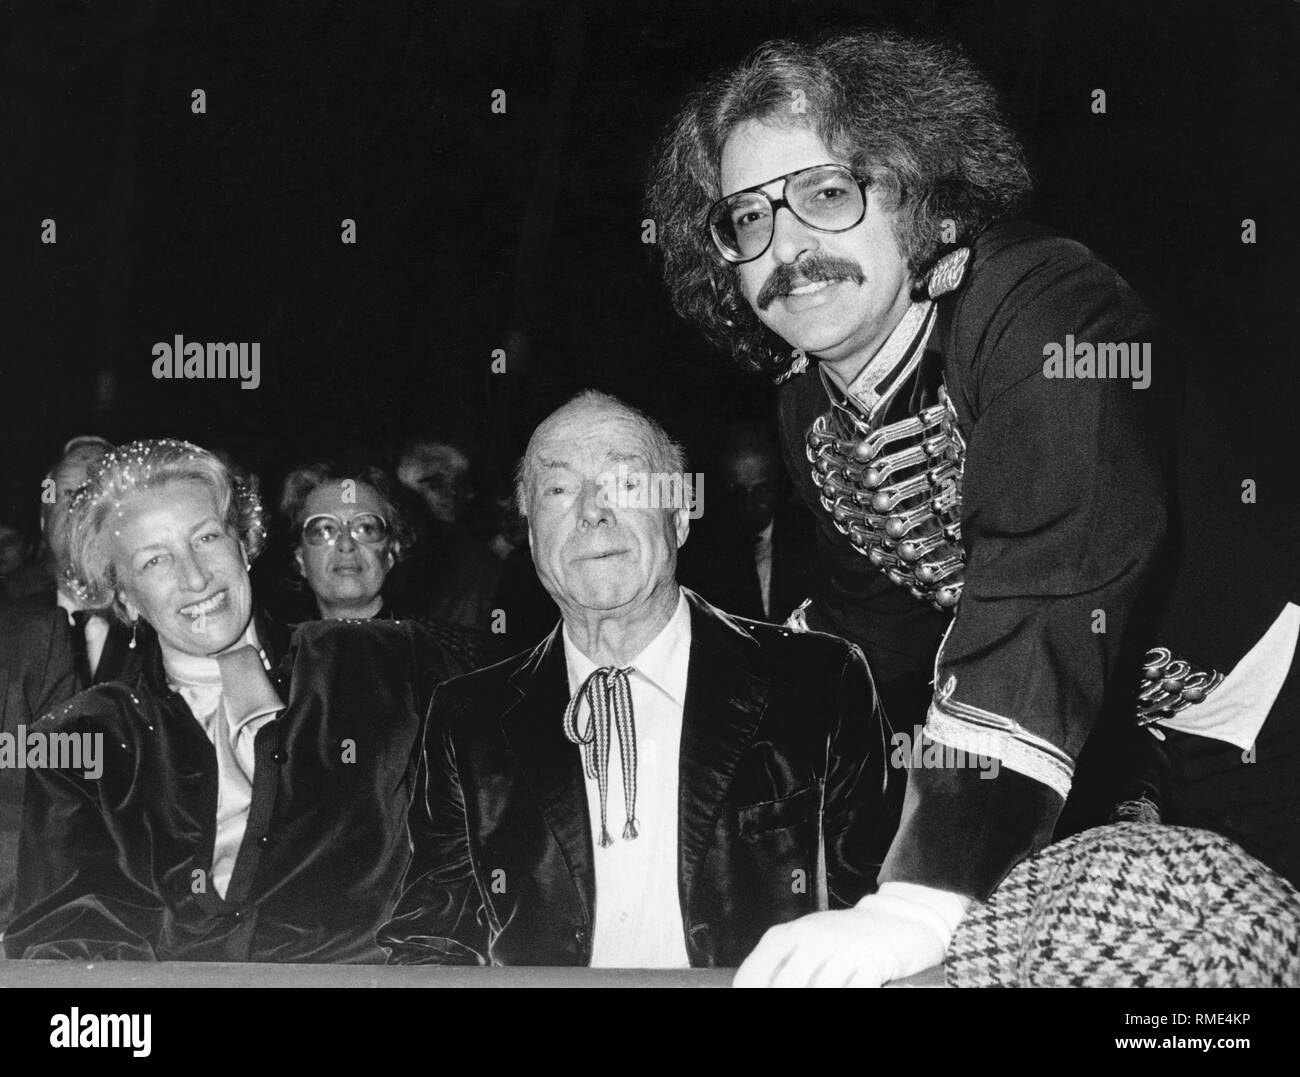 Actor Heinz Ruehmann (middle) and his wife Herta and Roncalli boss Bernhard Paul (right). Ruehmann played a clown in the ARD series 'Traumtaenzer'. Father and producer of the series is Gyula Trebitsch. Stock Photo